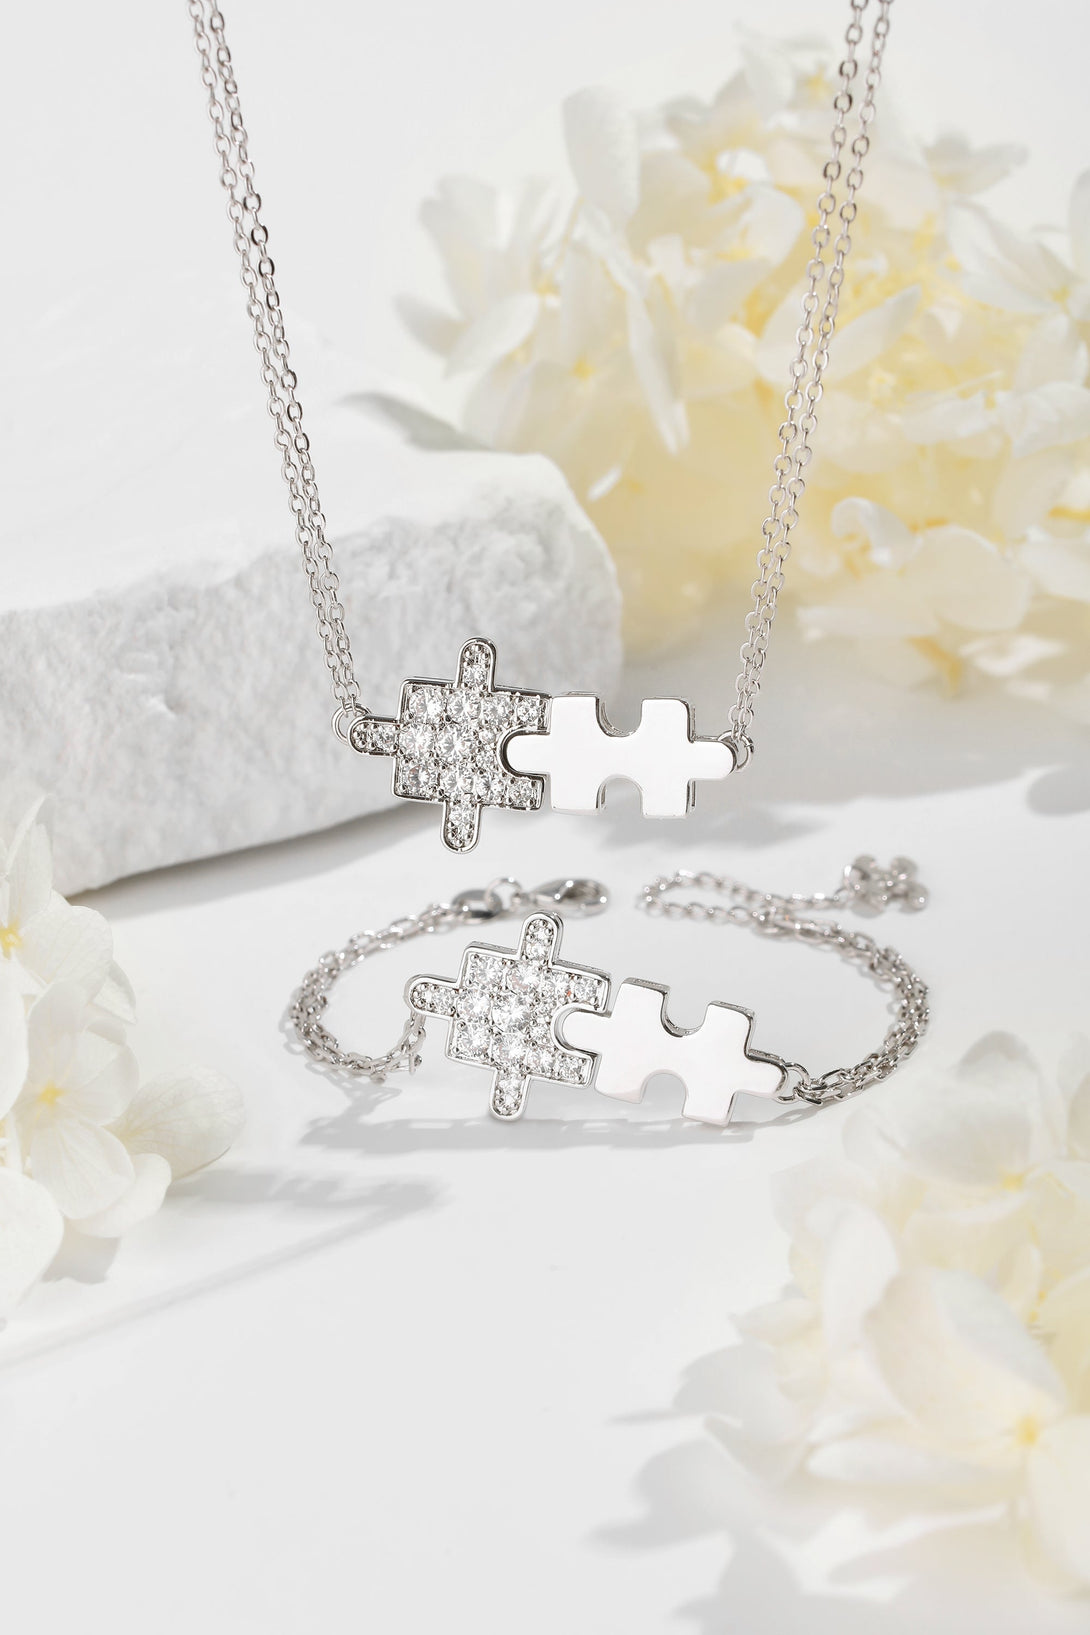 Silver Jigsaw Puzzle Drop Earrings and Bracelet Set - Classicharms